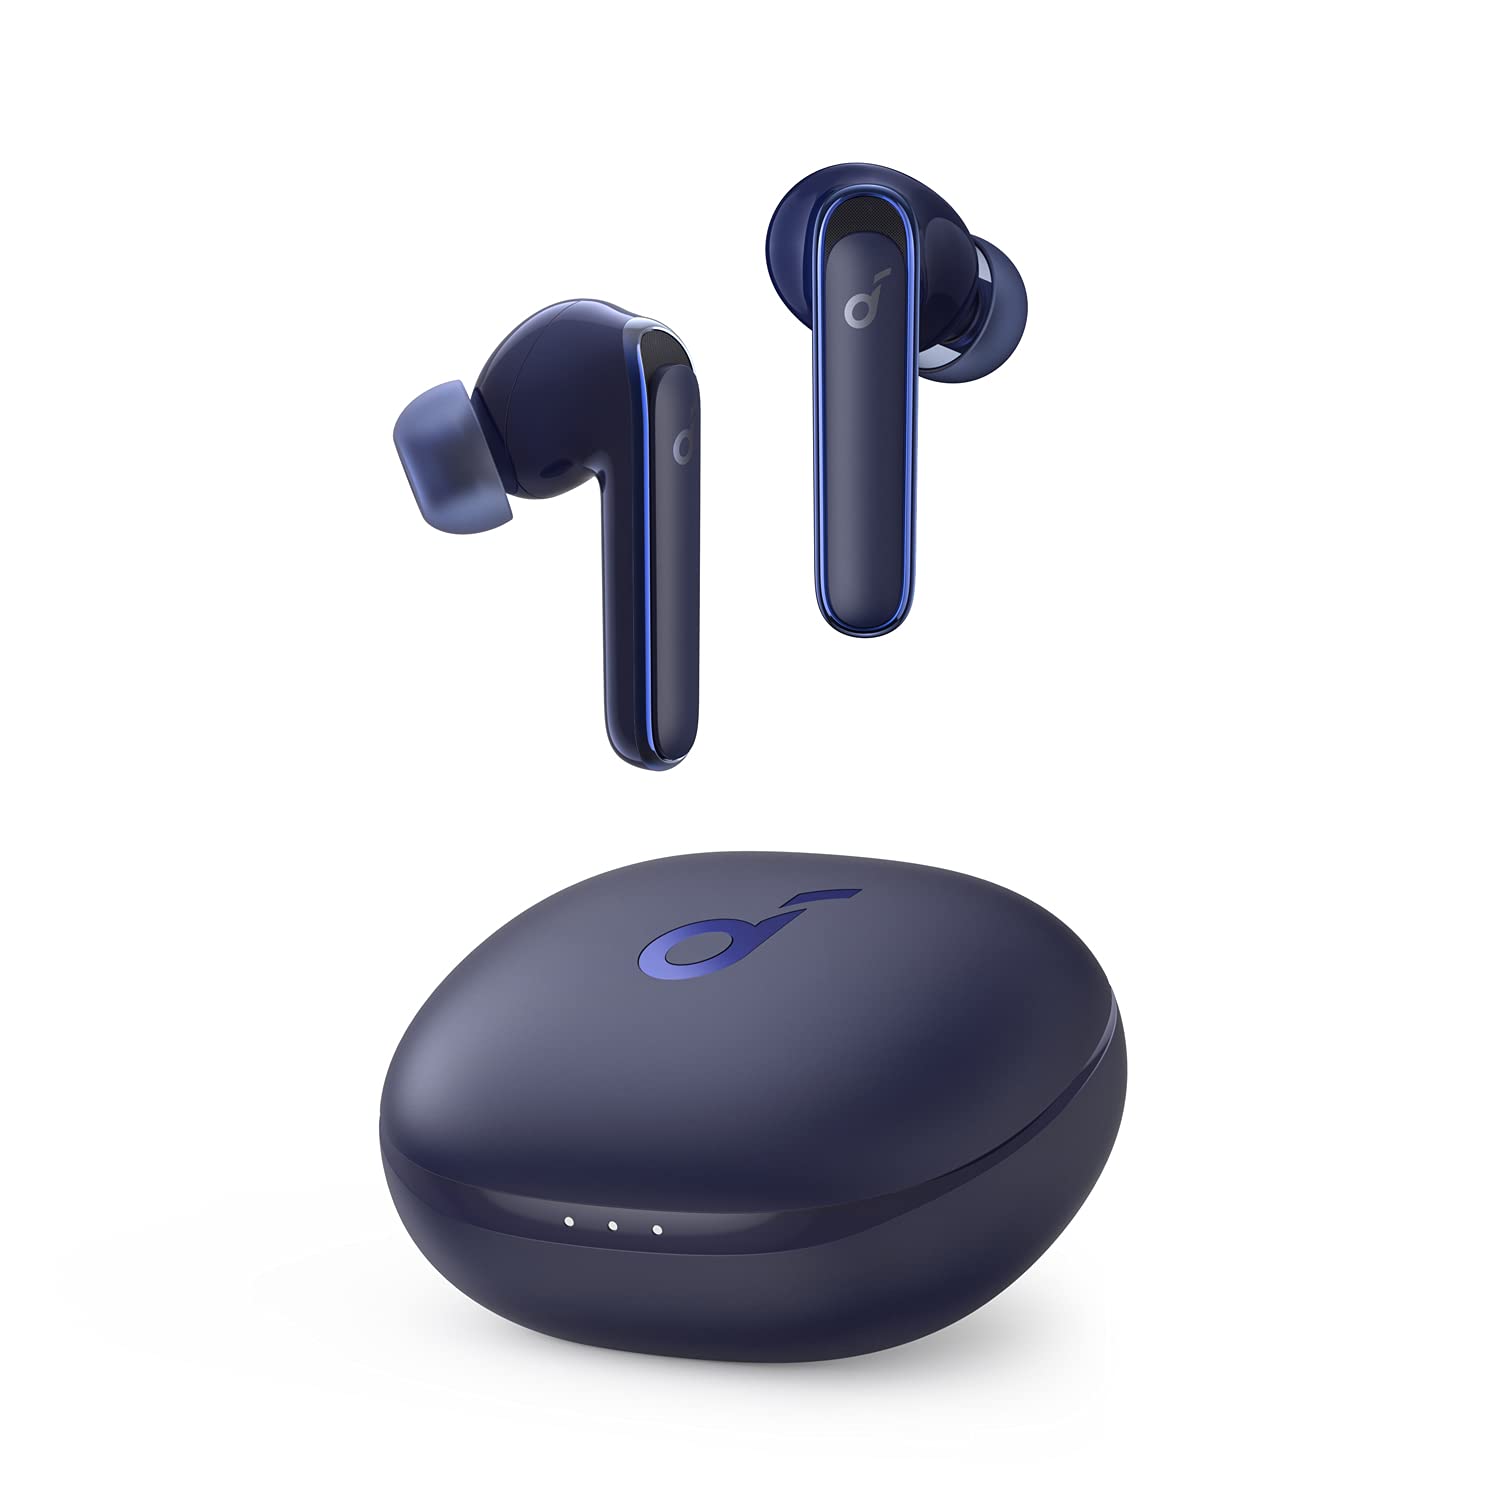 Anker Life P3 Noise Cancelling Earbuds $59.99 + Free Shipping $59.97